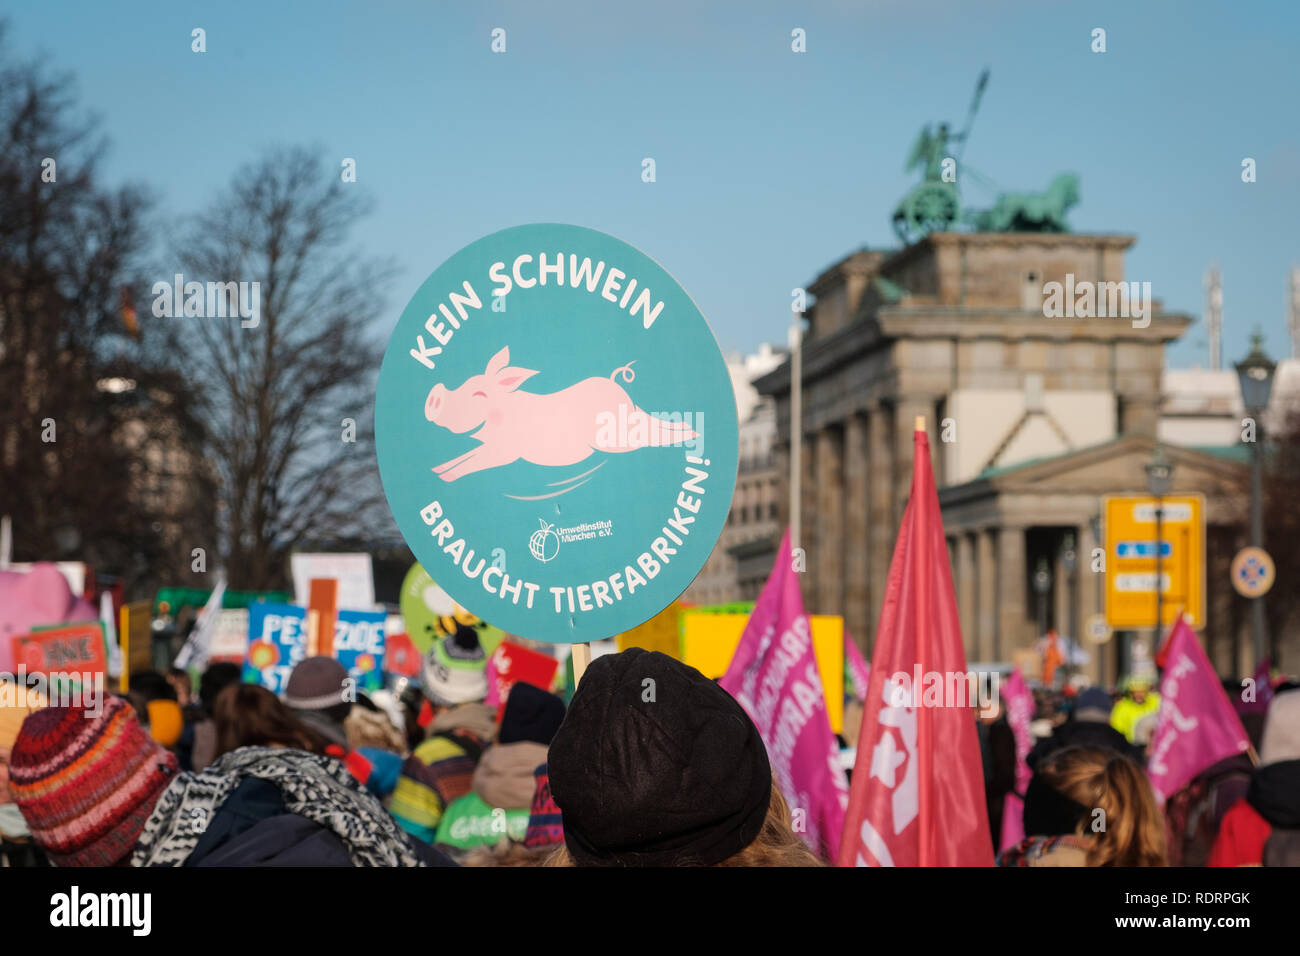 Berlin, Germany - January 19, 2019: Demonstration 'Wir haben es satt', against the german and EU agricultural policy and for sustainable agriculture in Berlin, Germany Credit: hanohiki/Alamy Live News Credit: hanohiki/Alamy Live News Stock Photo